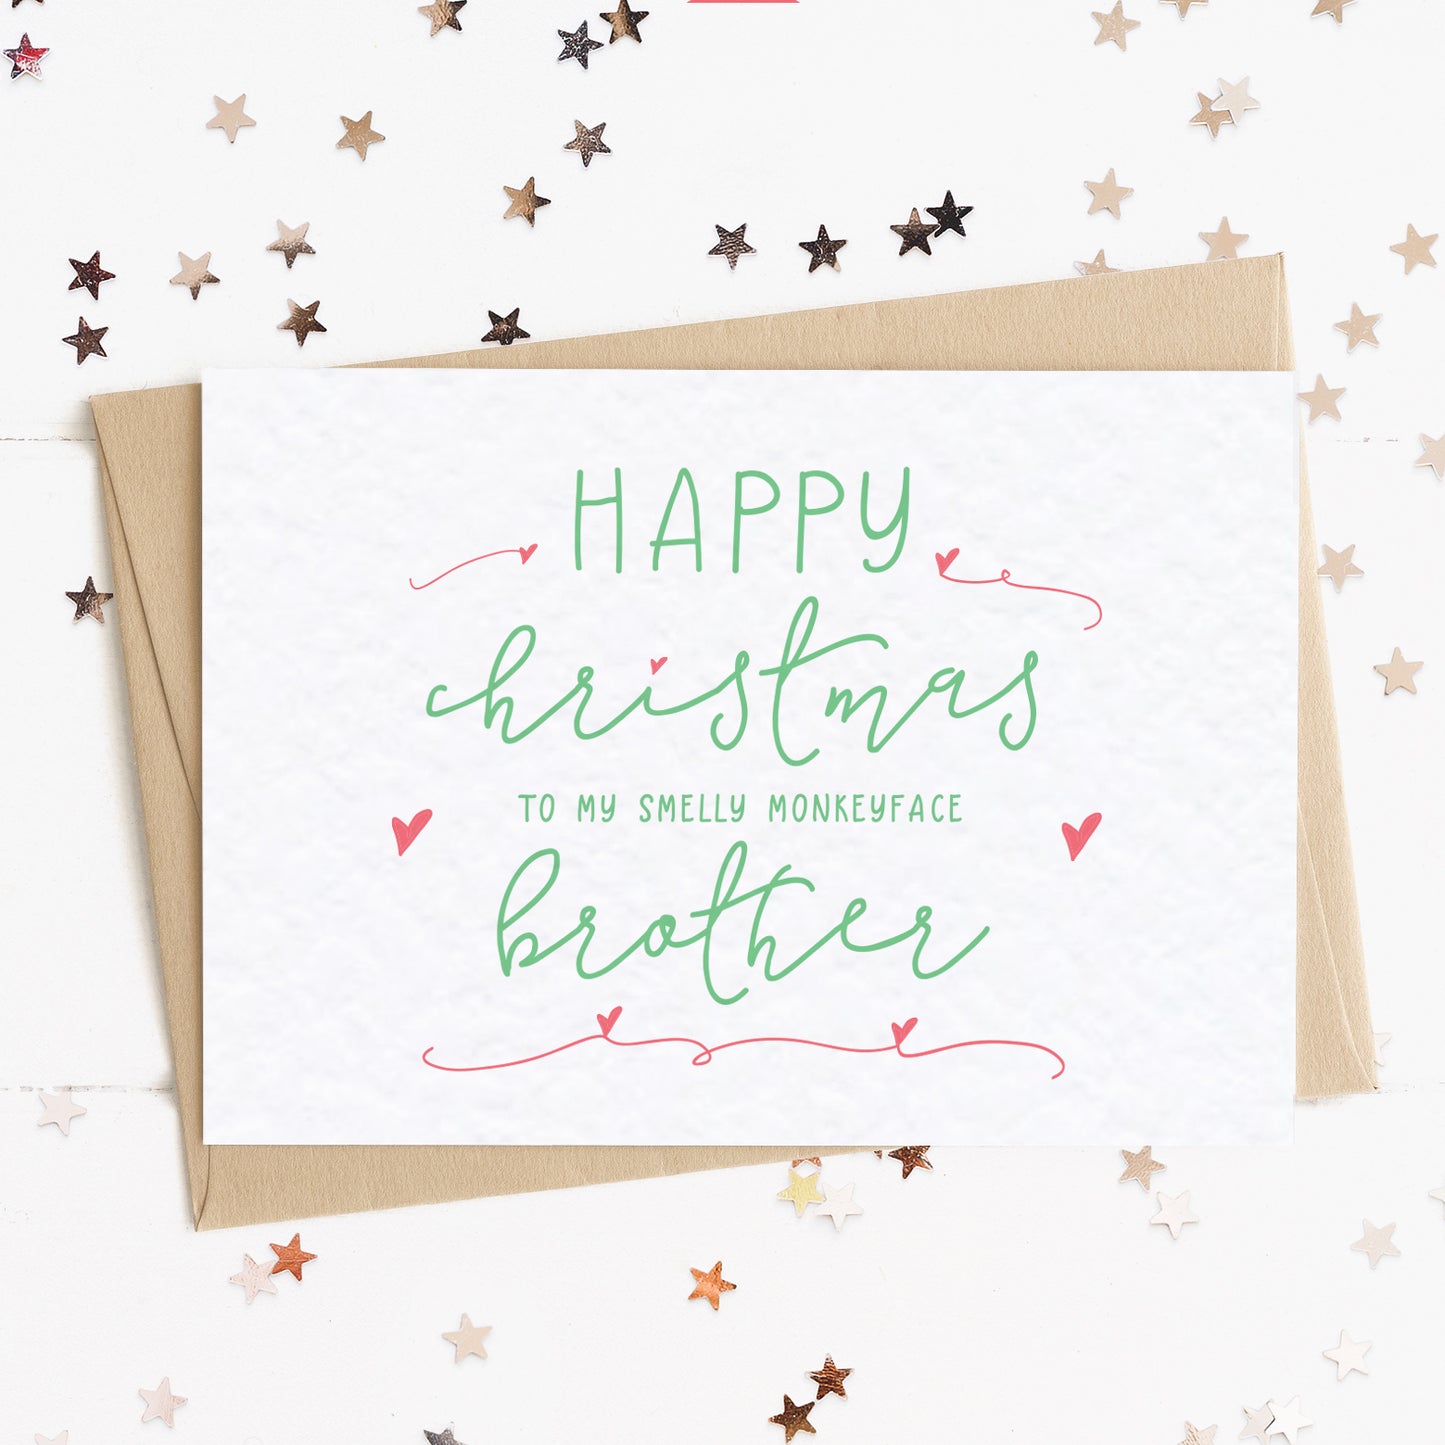 "Merry Christmas To My Smelly Monkeyface Brother" Funny Festive Card